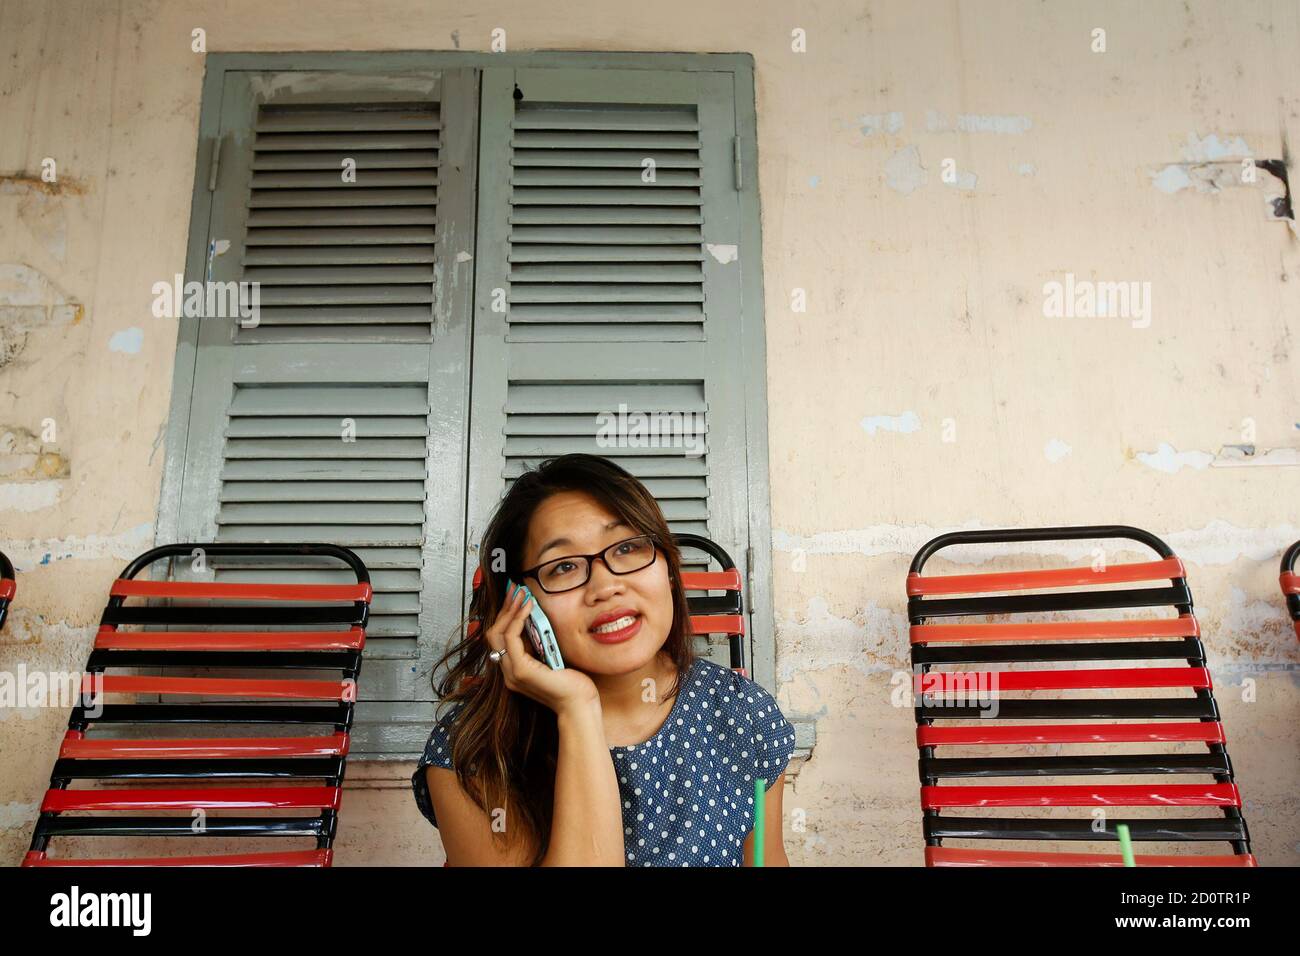 Film producer Jenni Trang Le talks on phone at a cafe in Ho Chi Minh City  March 9, 2015. Jenni Trang Le has made her mark in the Vietnamese film  industry, producing